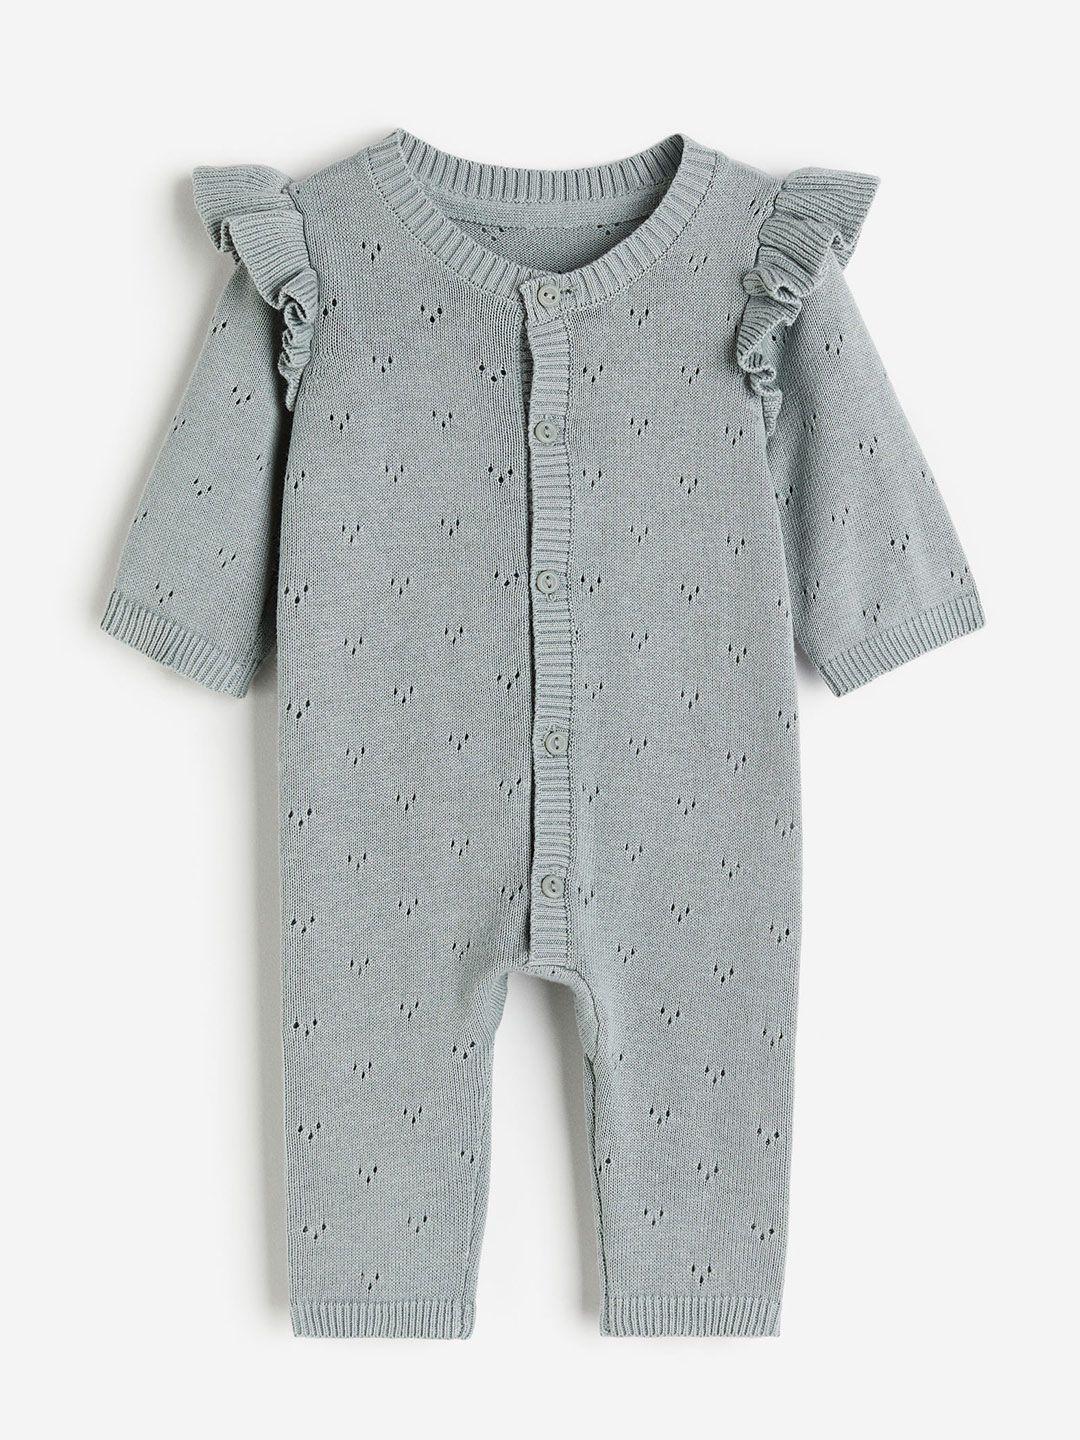 h&m boys knitted cotton romper suit